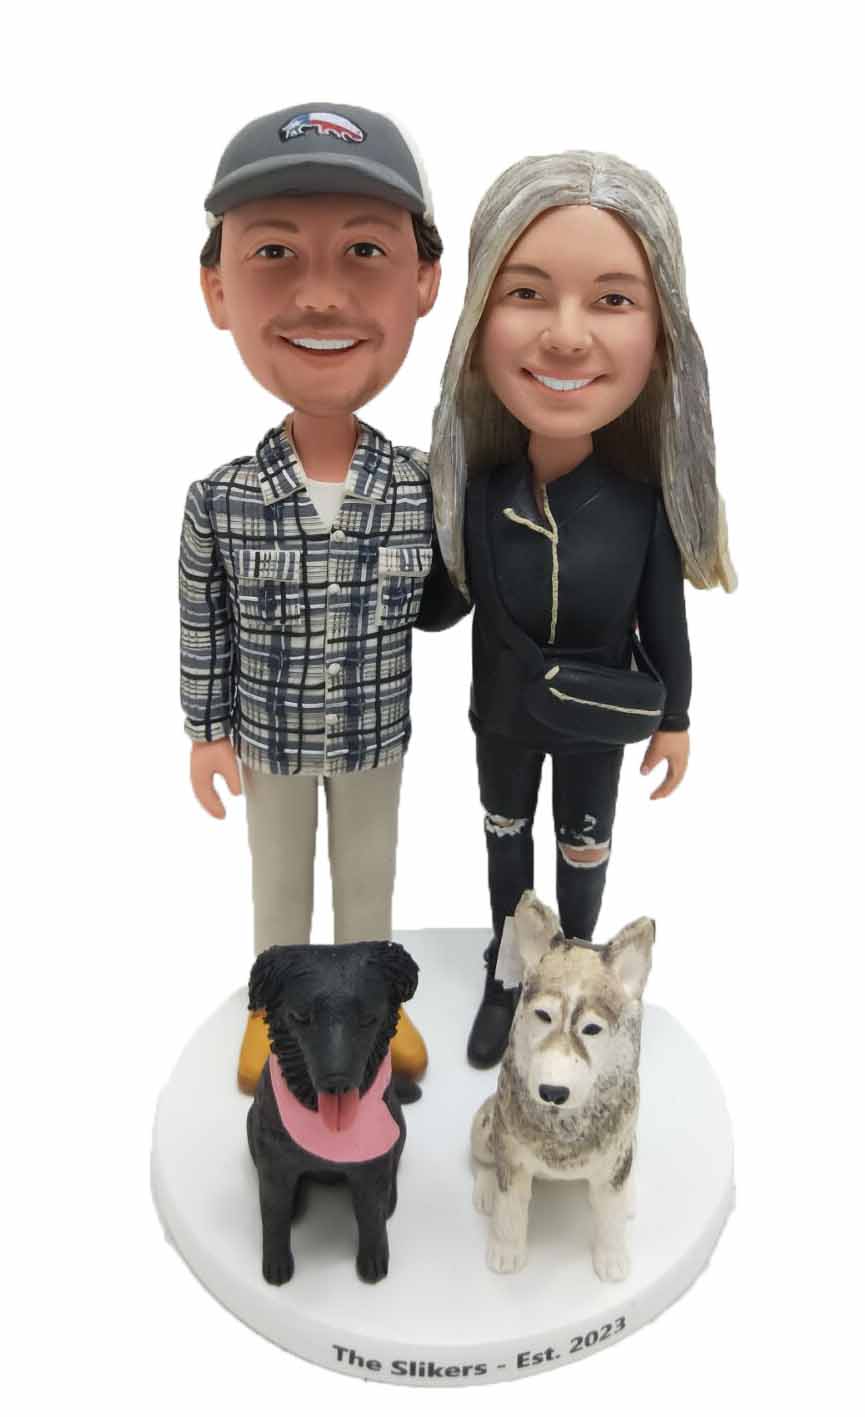 Custom Bobbleheads Personalized Bobbleheads For Anniversary(Without Pets)